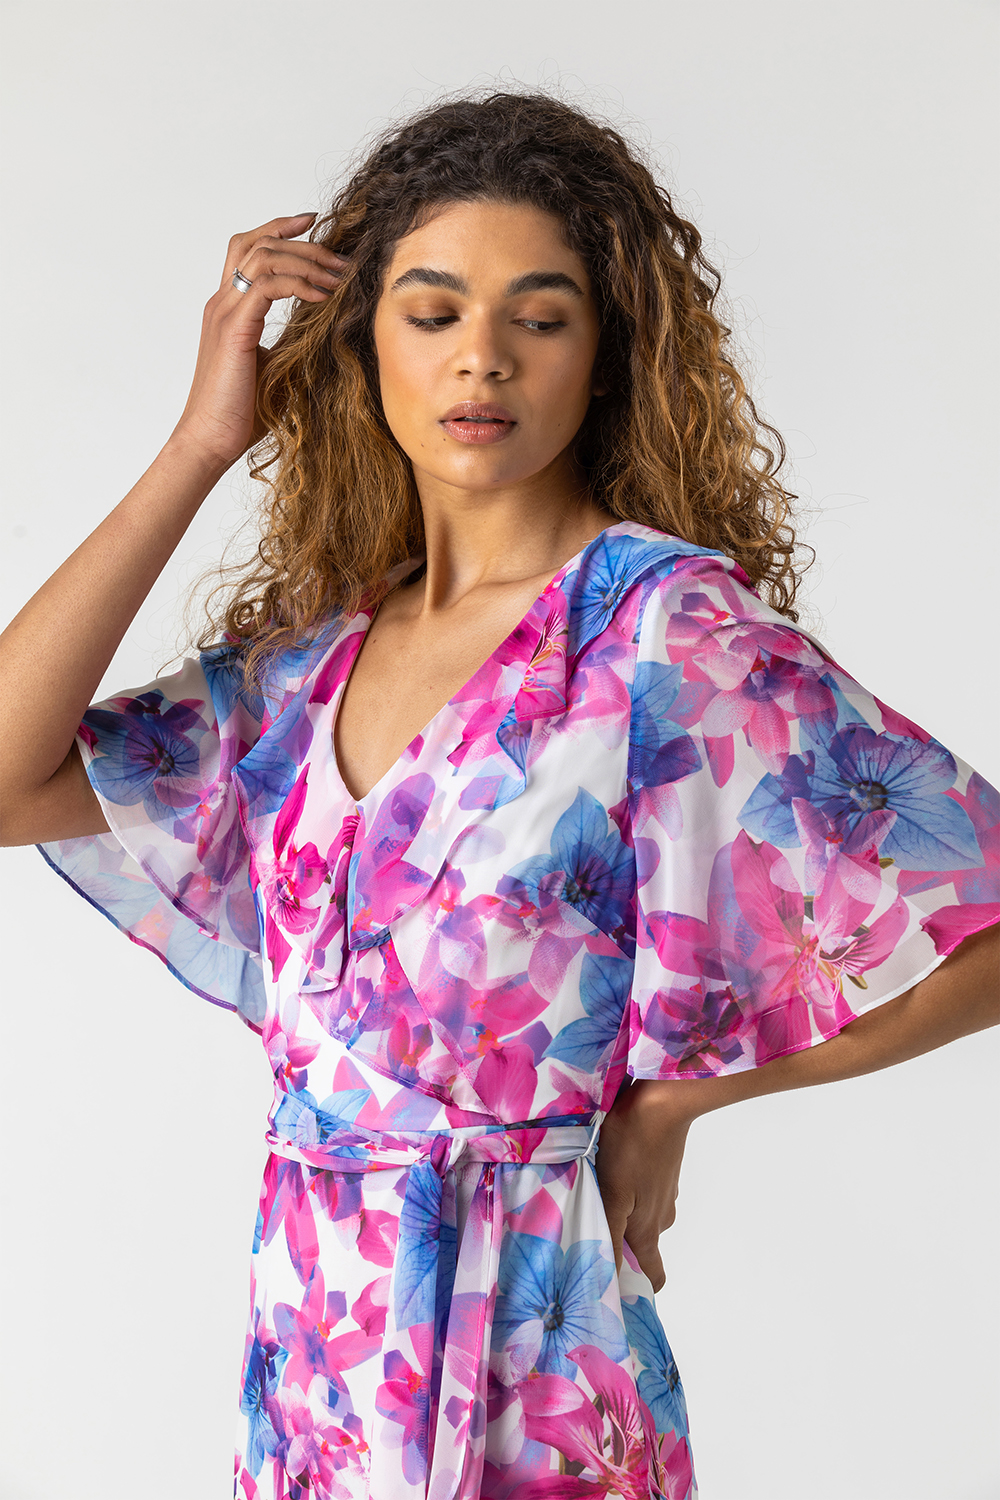 PINK Floral Print Frill Wrap Dress, Image 4 of 5